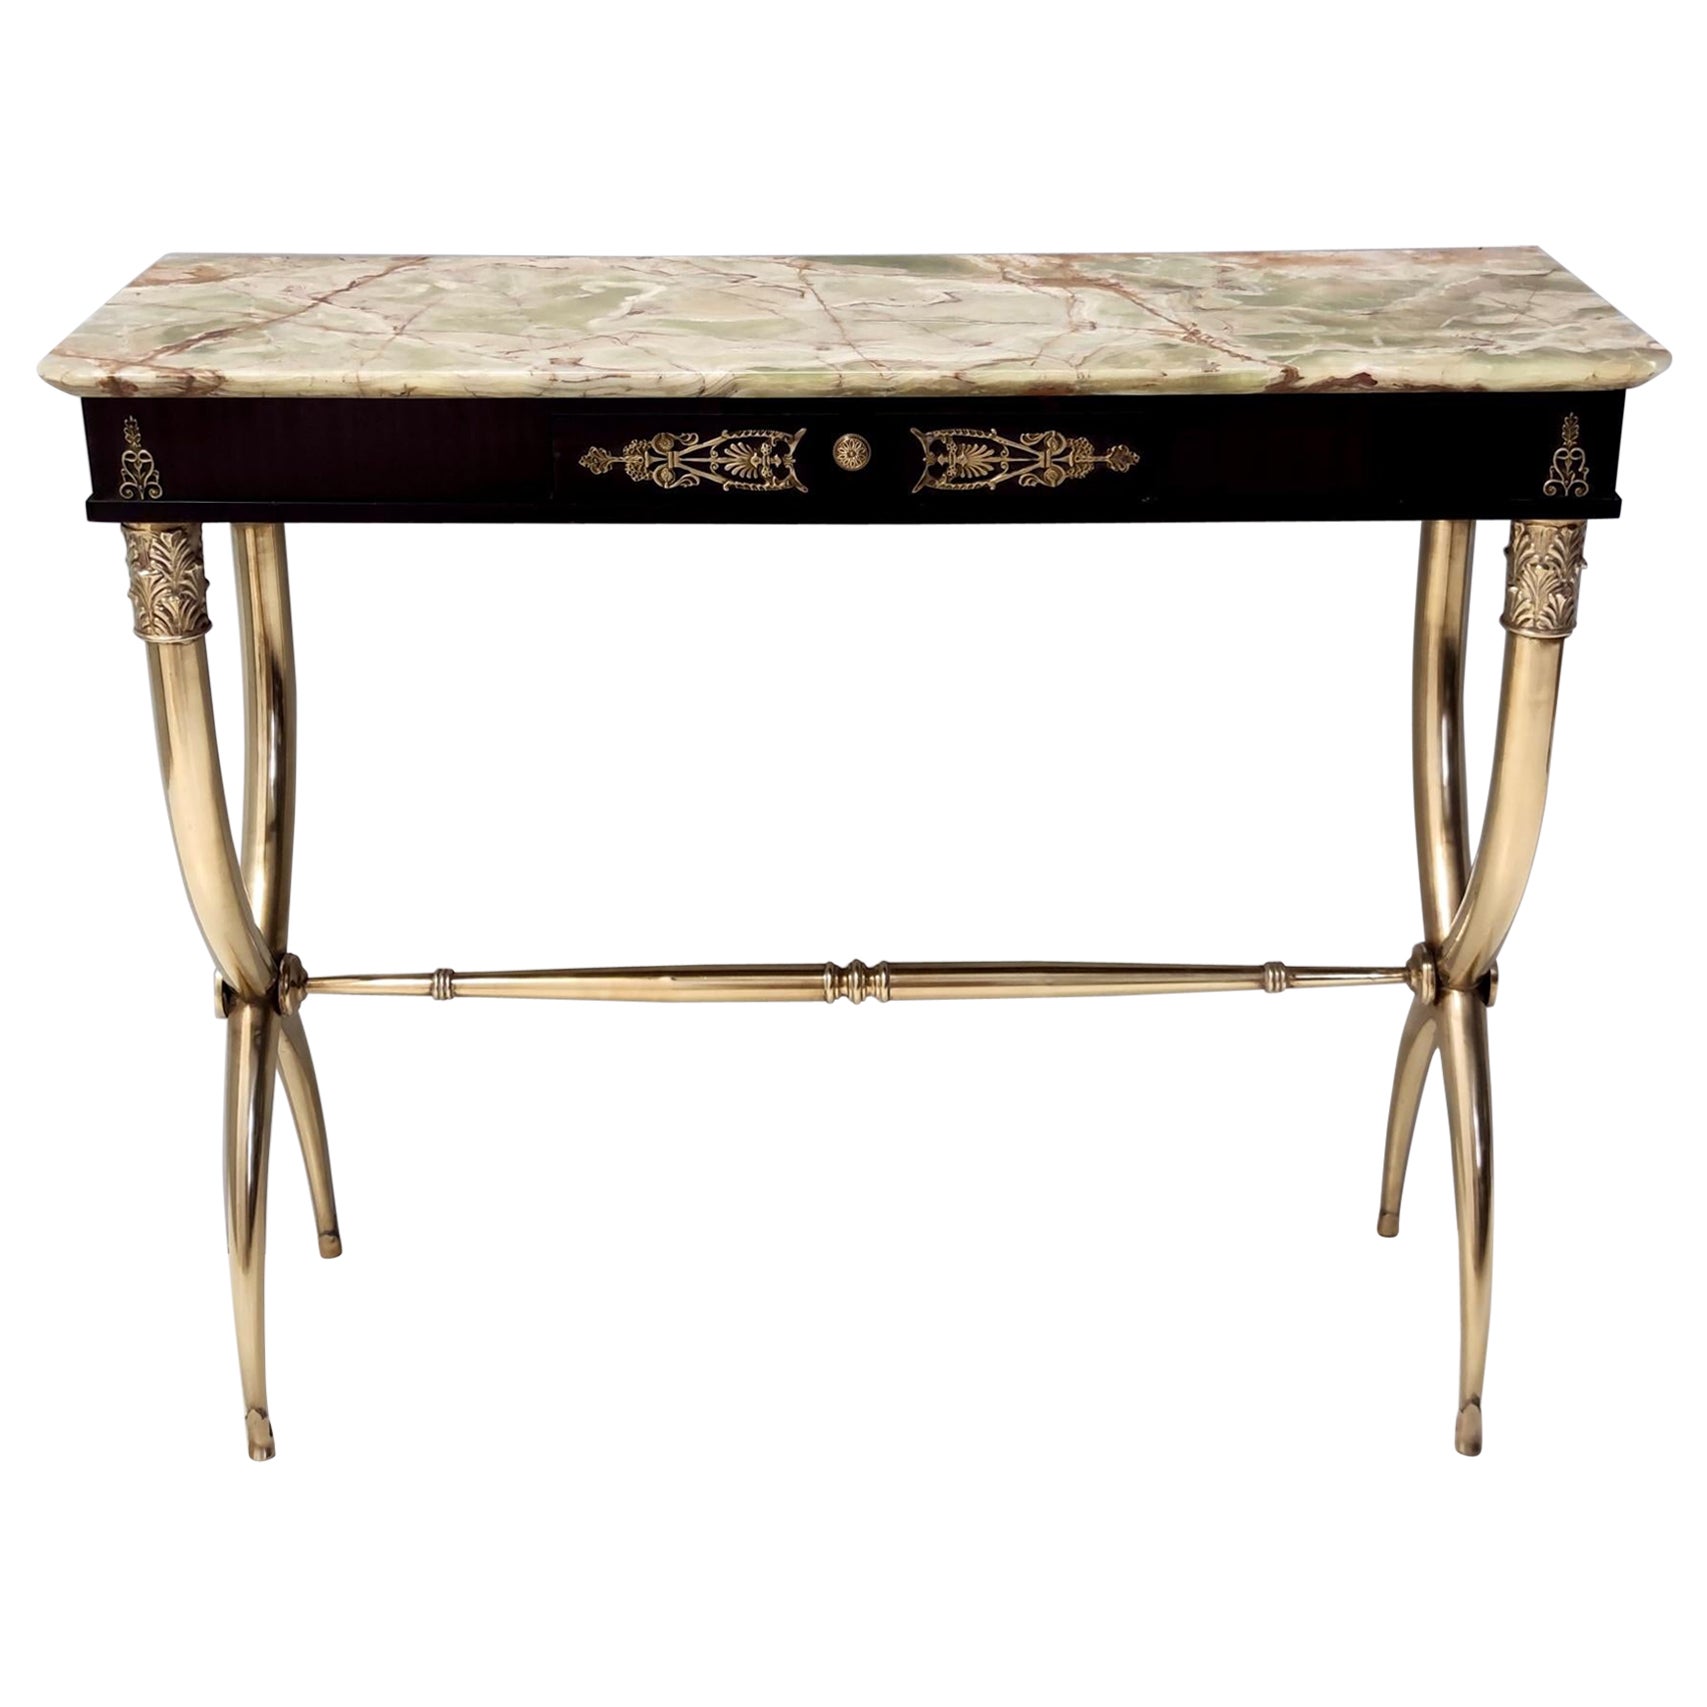 Vintage Brass and Walnut Console with an Onyx Top Ascribable to T. Buzzi, Italy